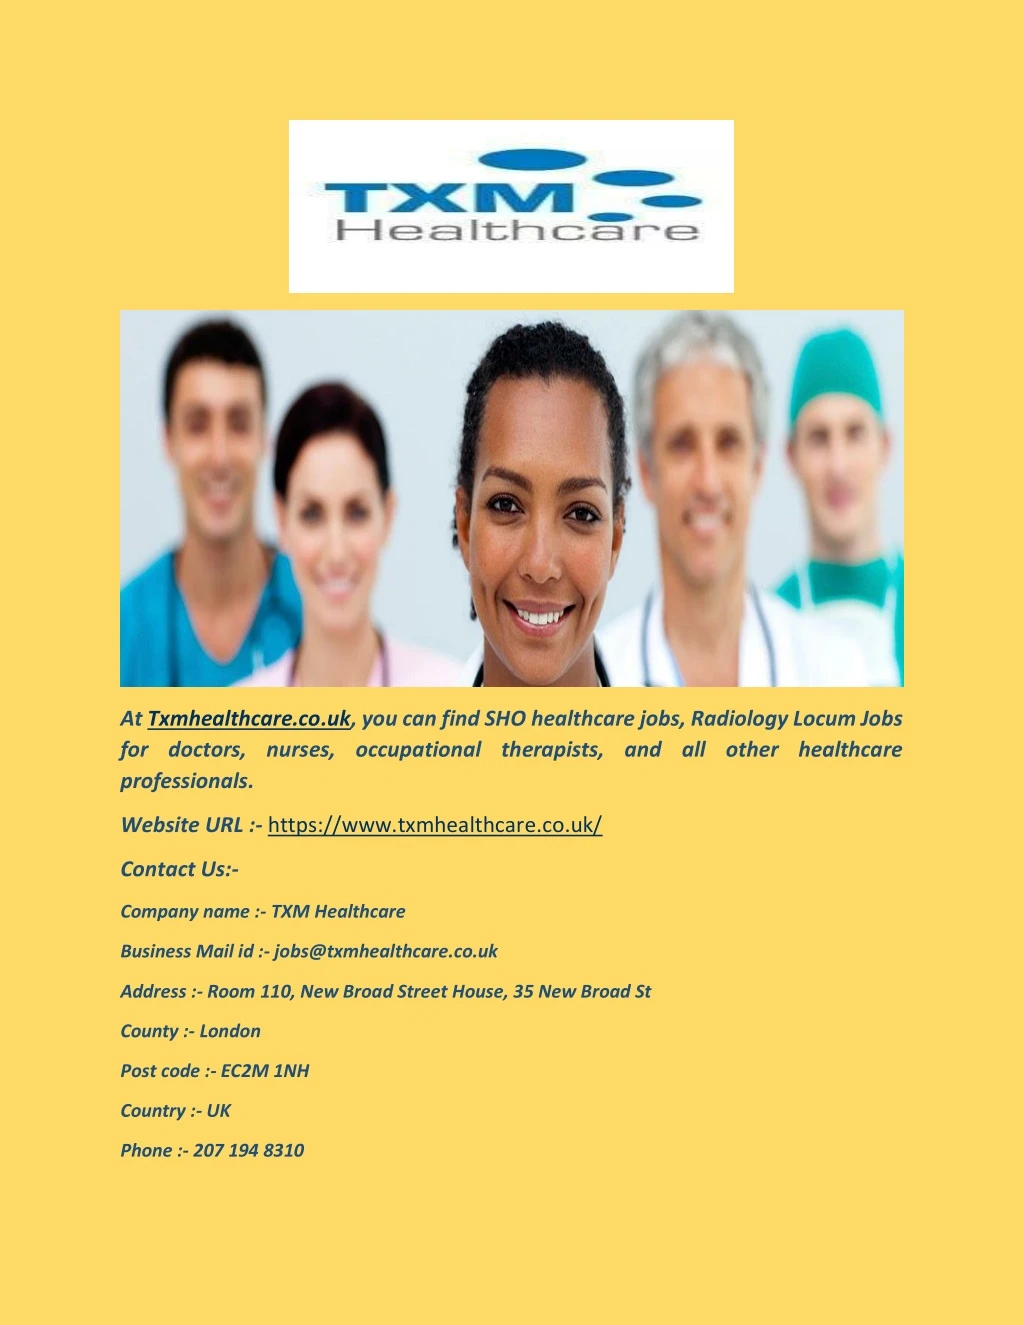 at txmhealthcare co uk you can find